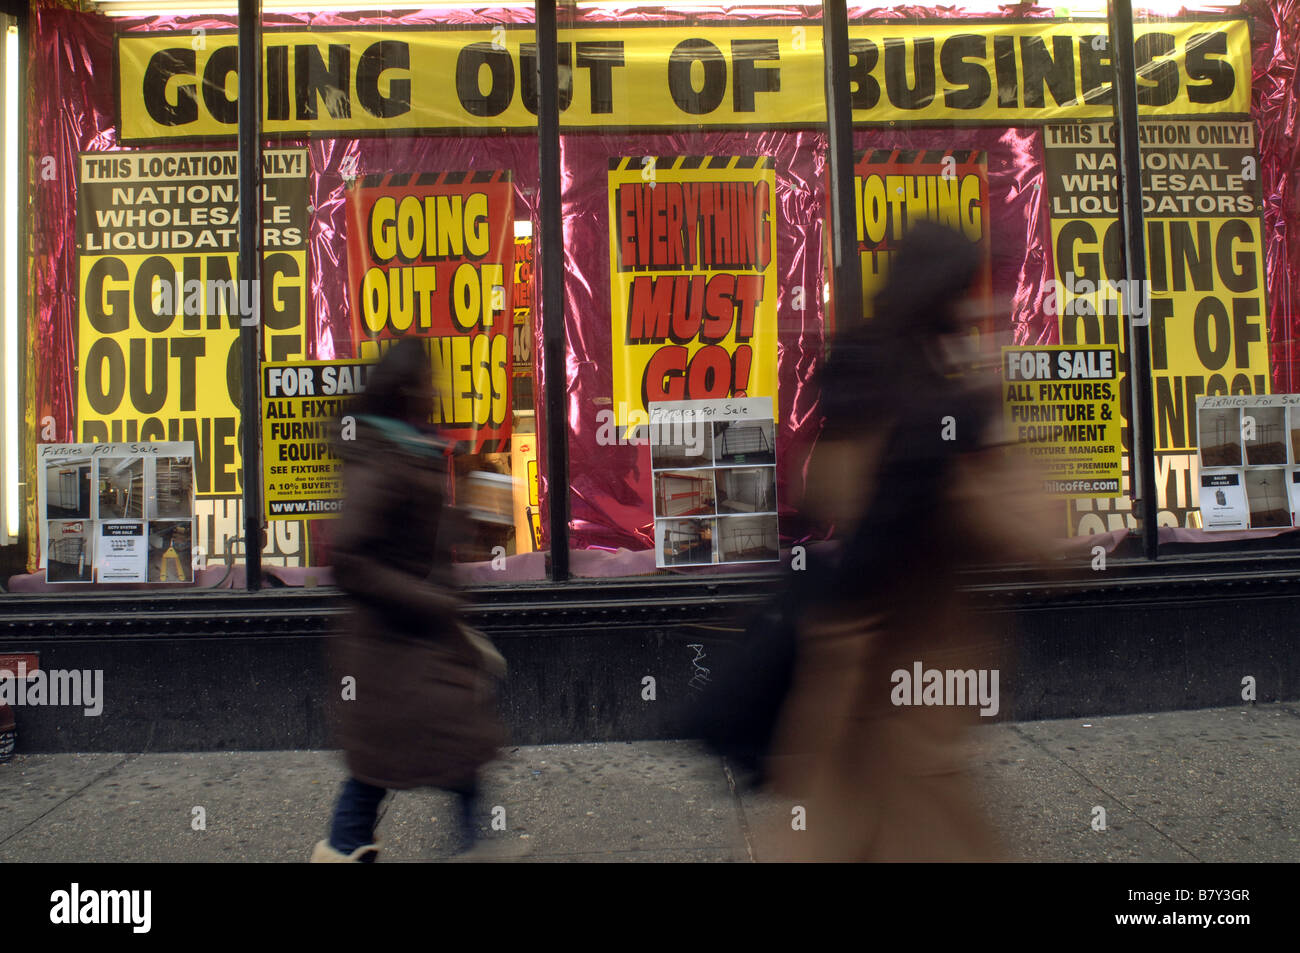 National Wholesale Liquidators in New York on Broadway advertises it s going out of business sale Stock Photo